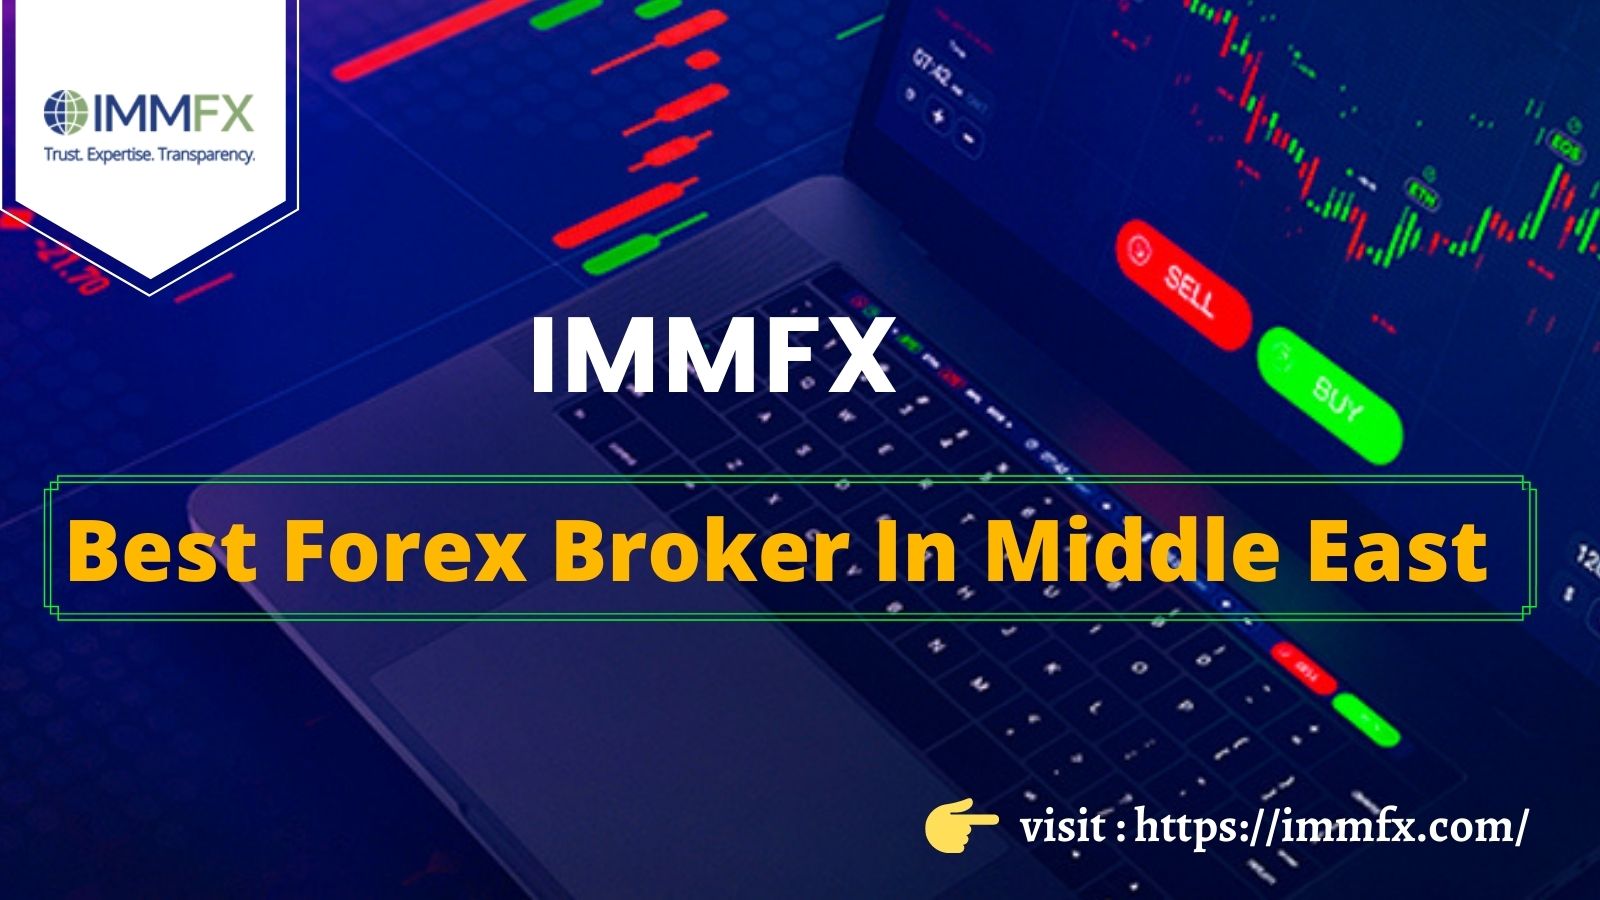 Best Forex Brokers in the Middle East – IMMFX